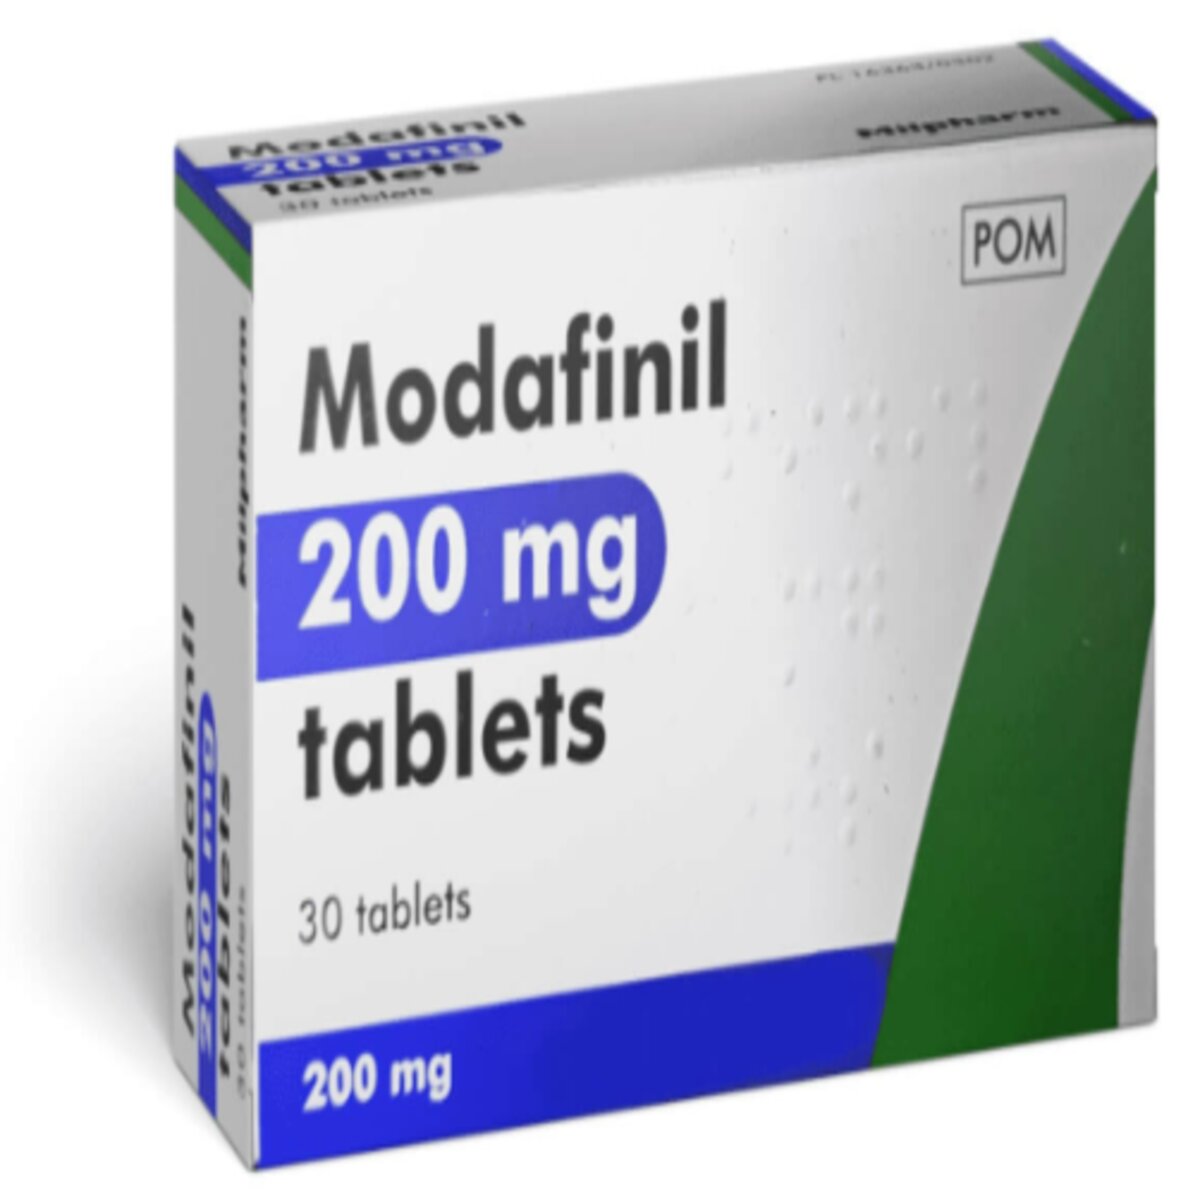  Enhance Your Focus: Buy Modafinil Easily with Cash on Delivery